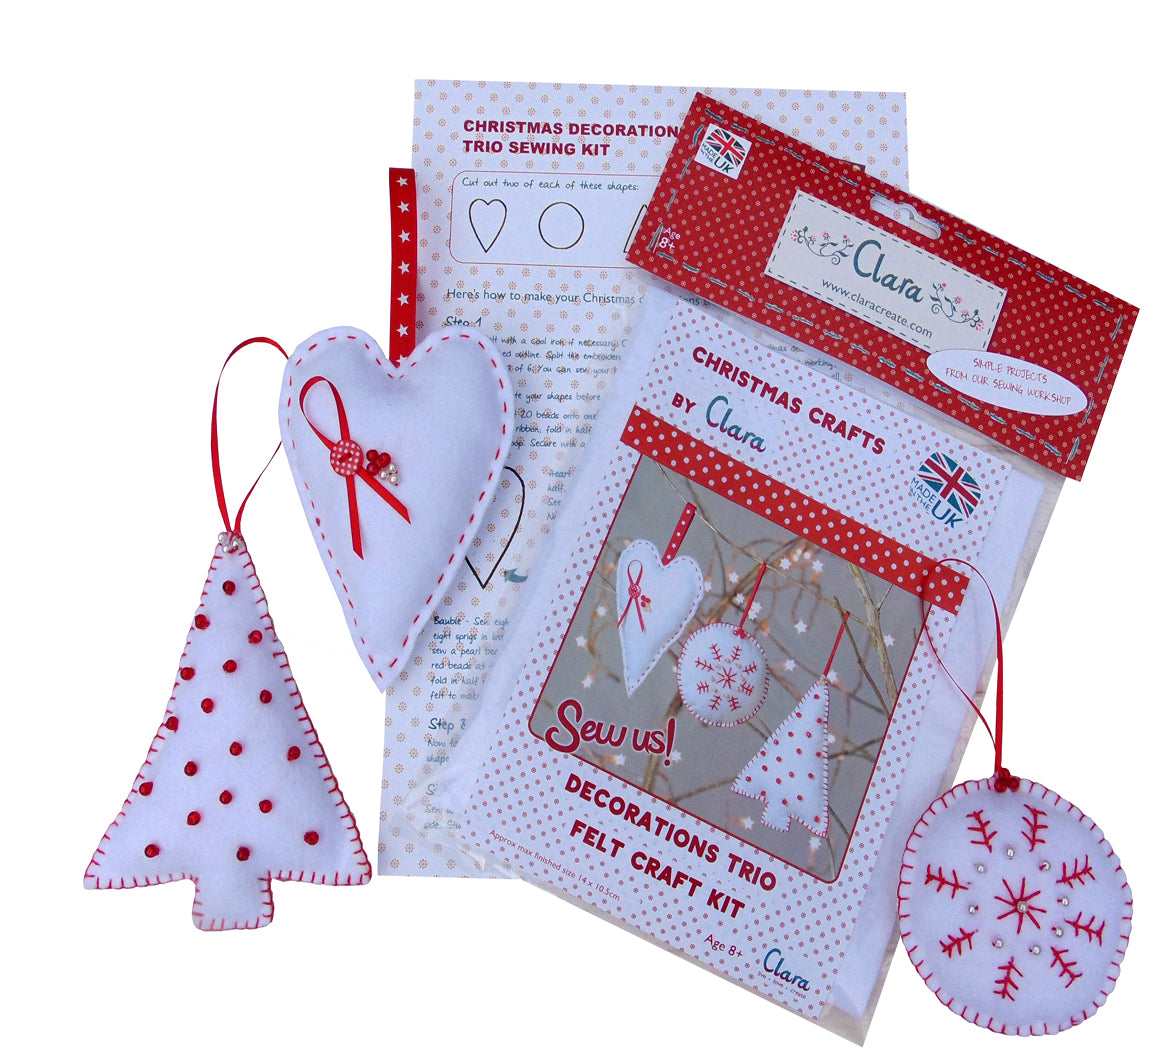 Christmas Decorations Sewing Kit - 3 pieces